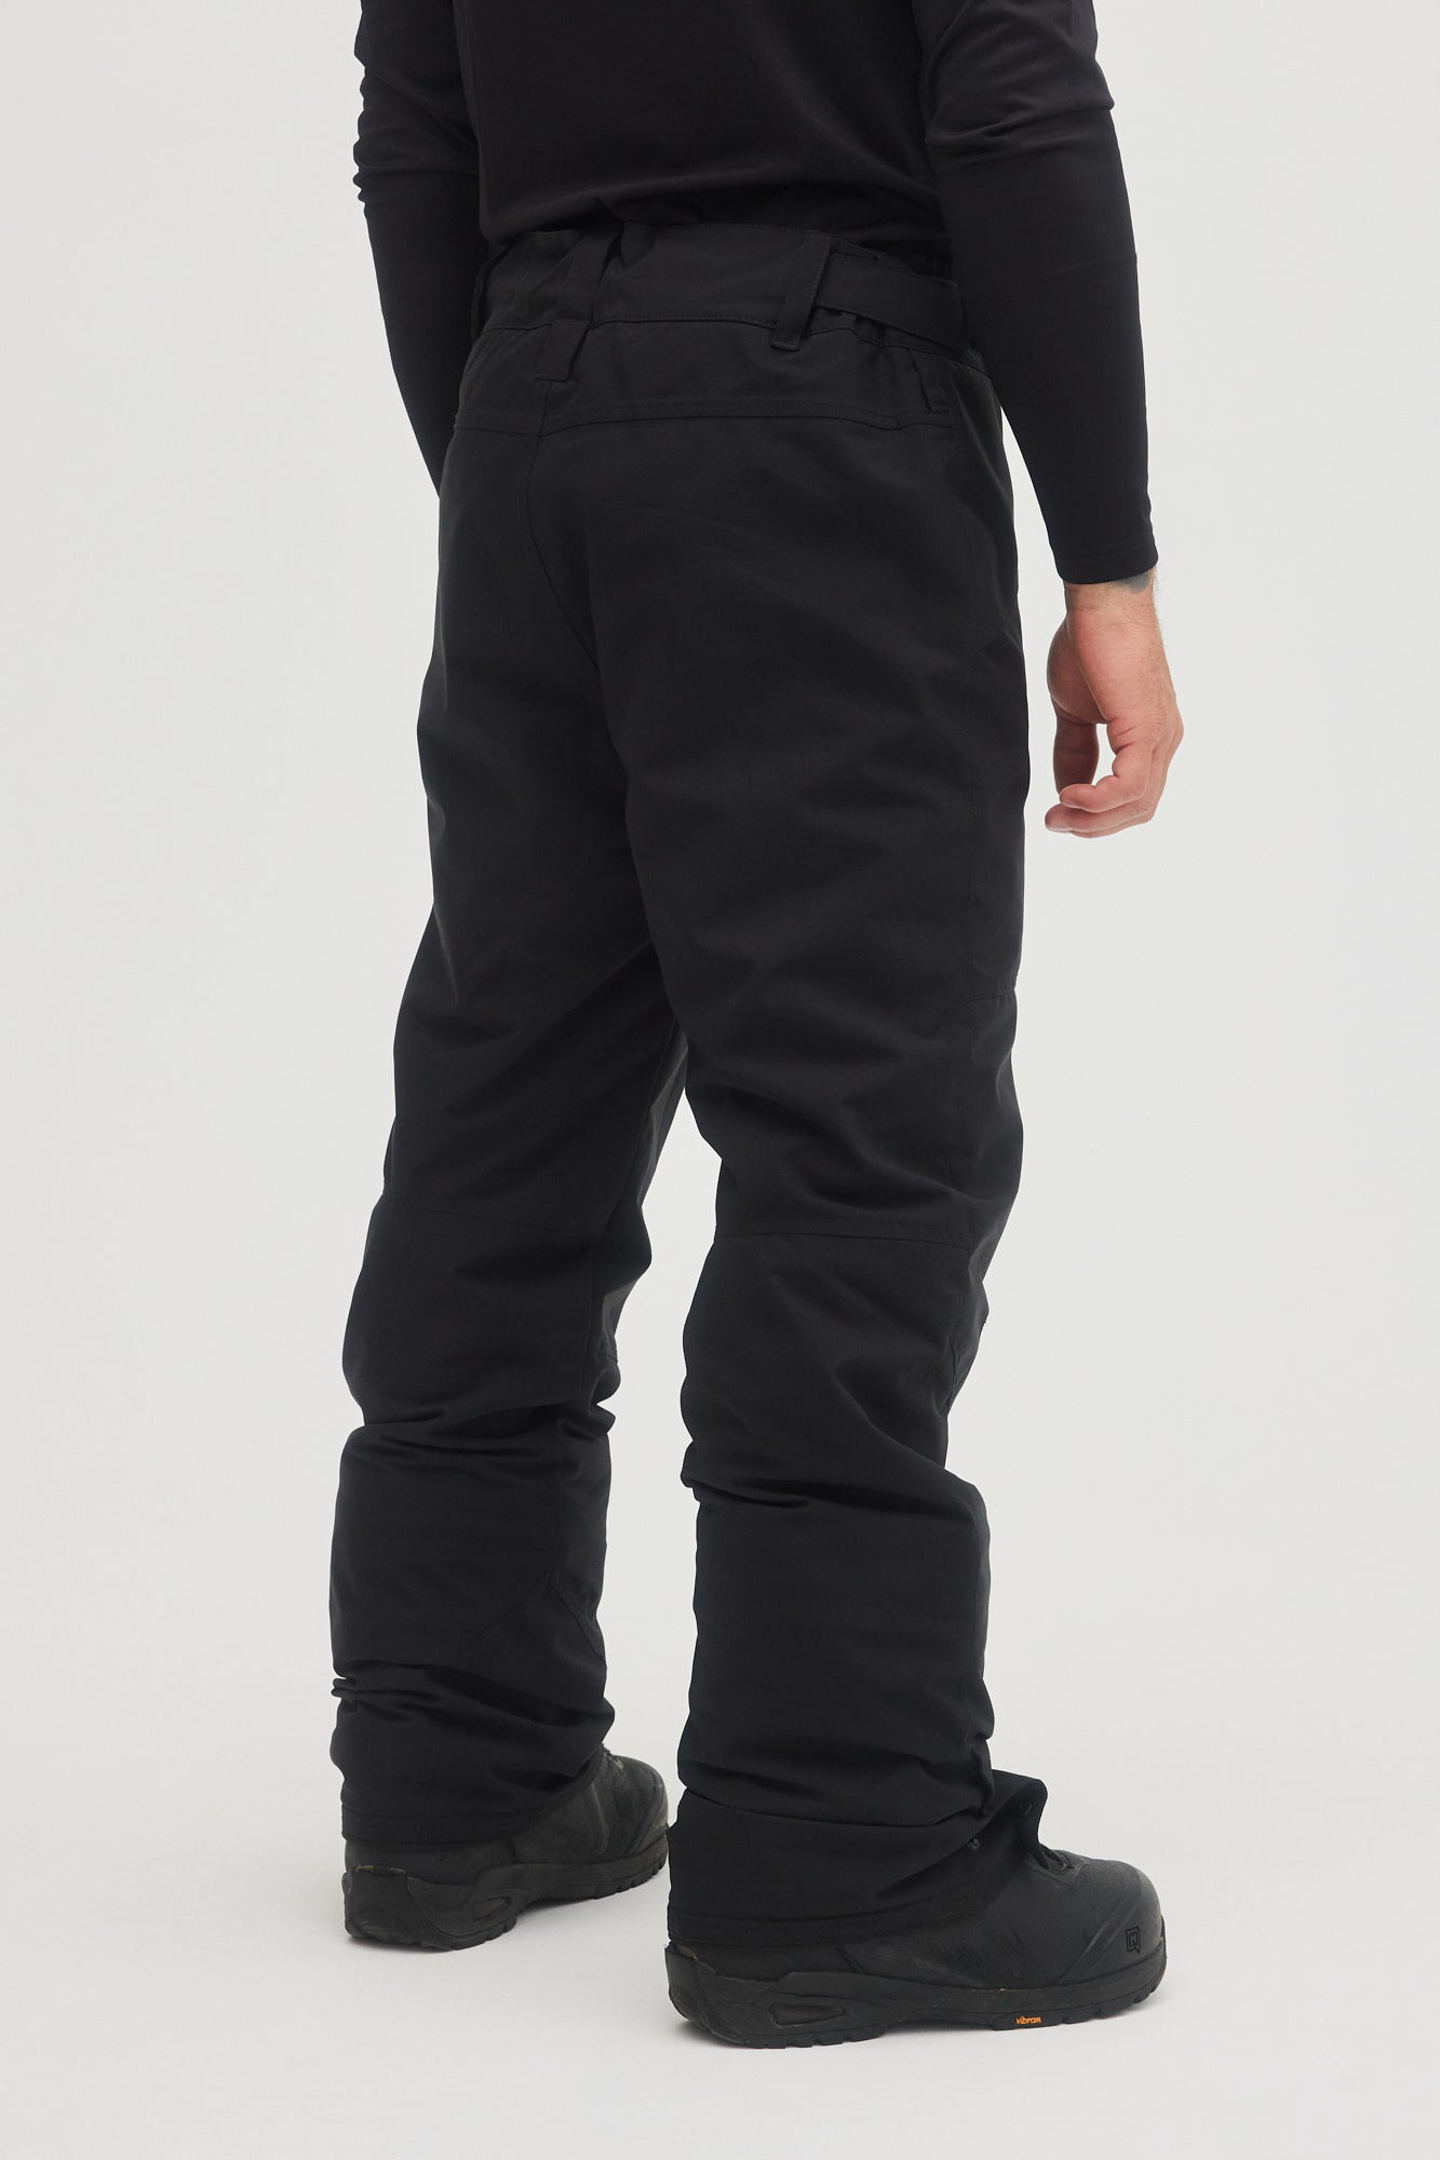 Hammer Insulated Pants - Black Out | O'Neill